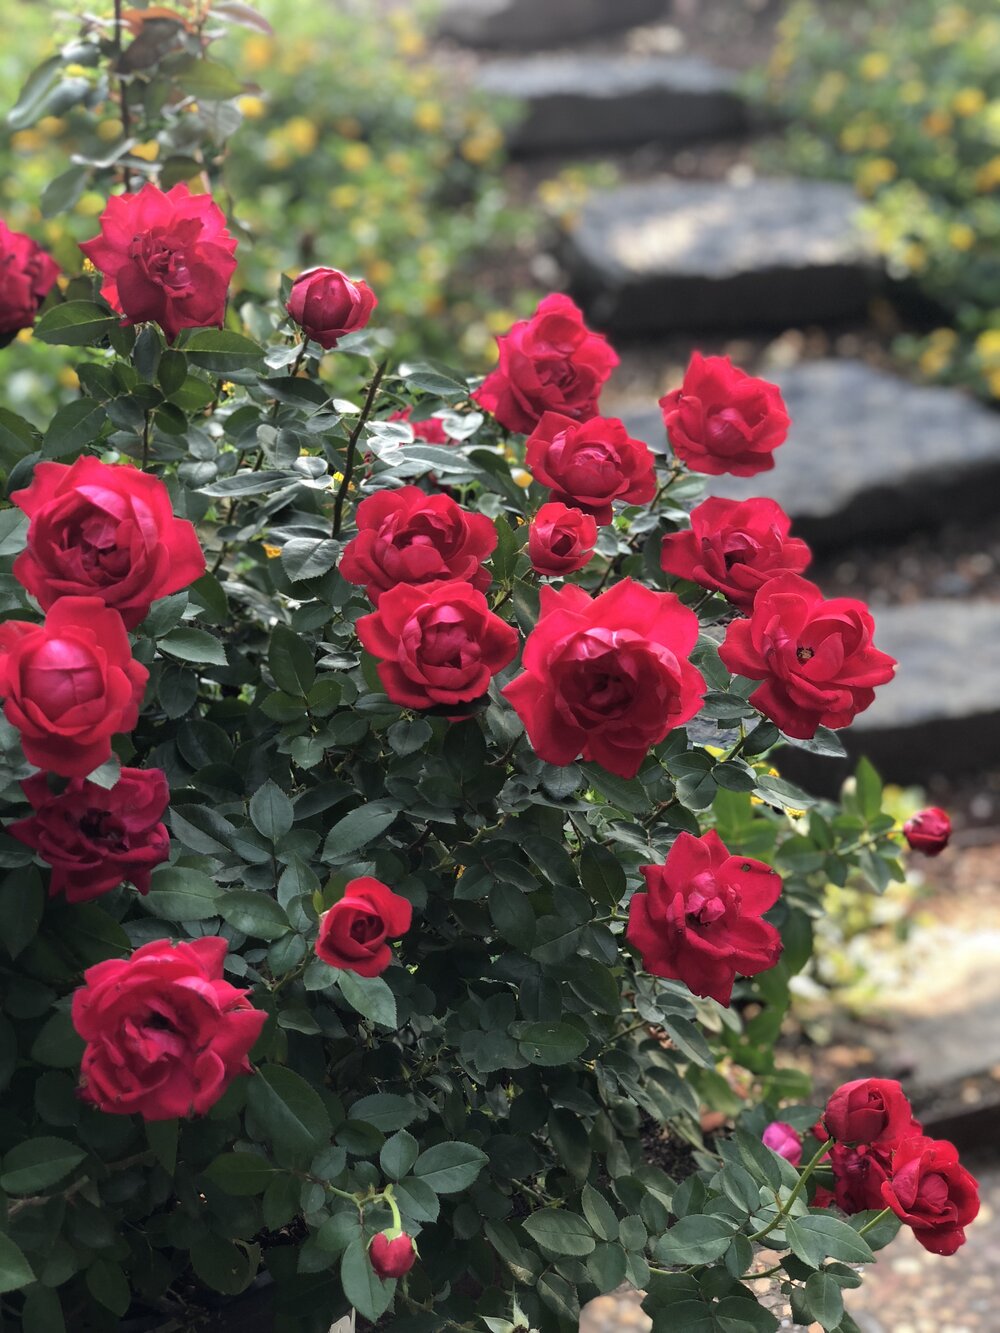 The Red Rose American Rose Trials Sustainability®